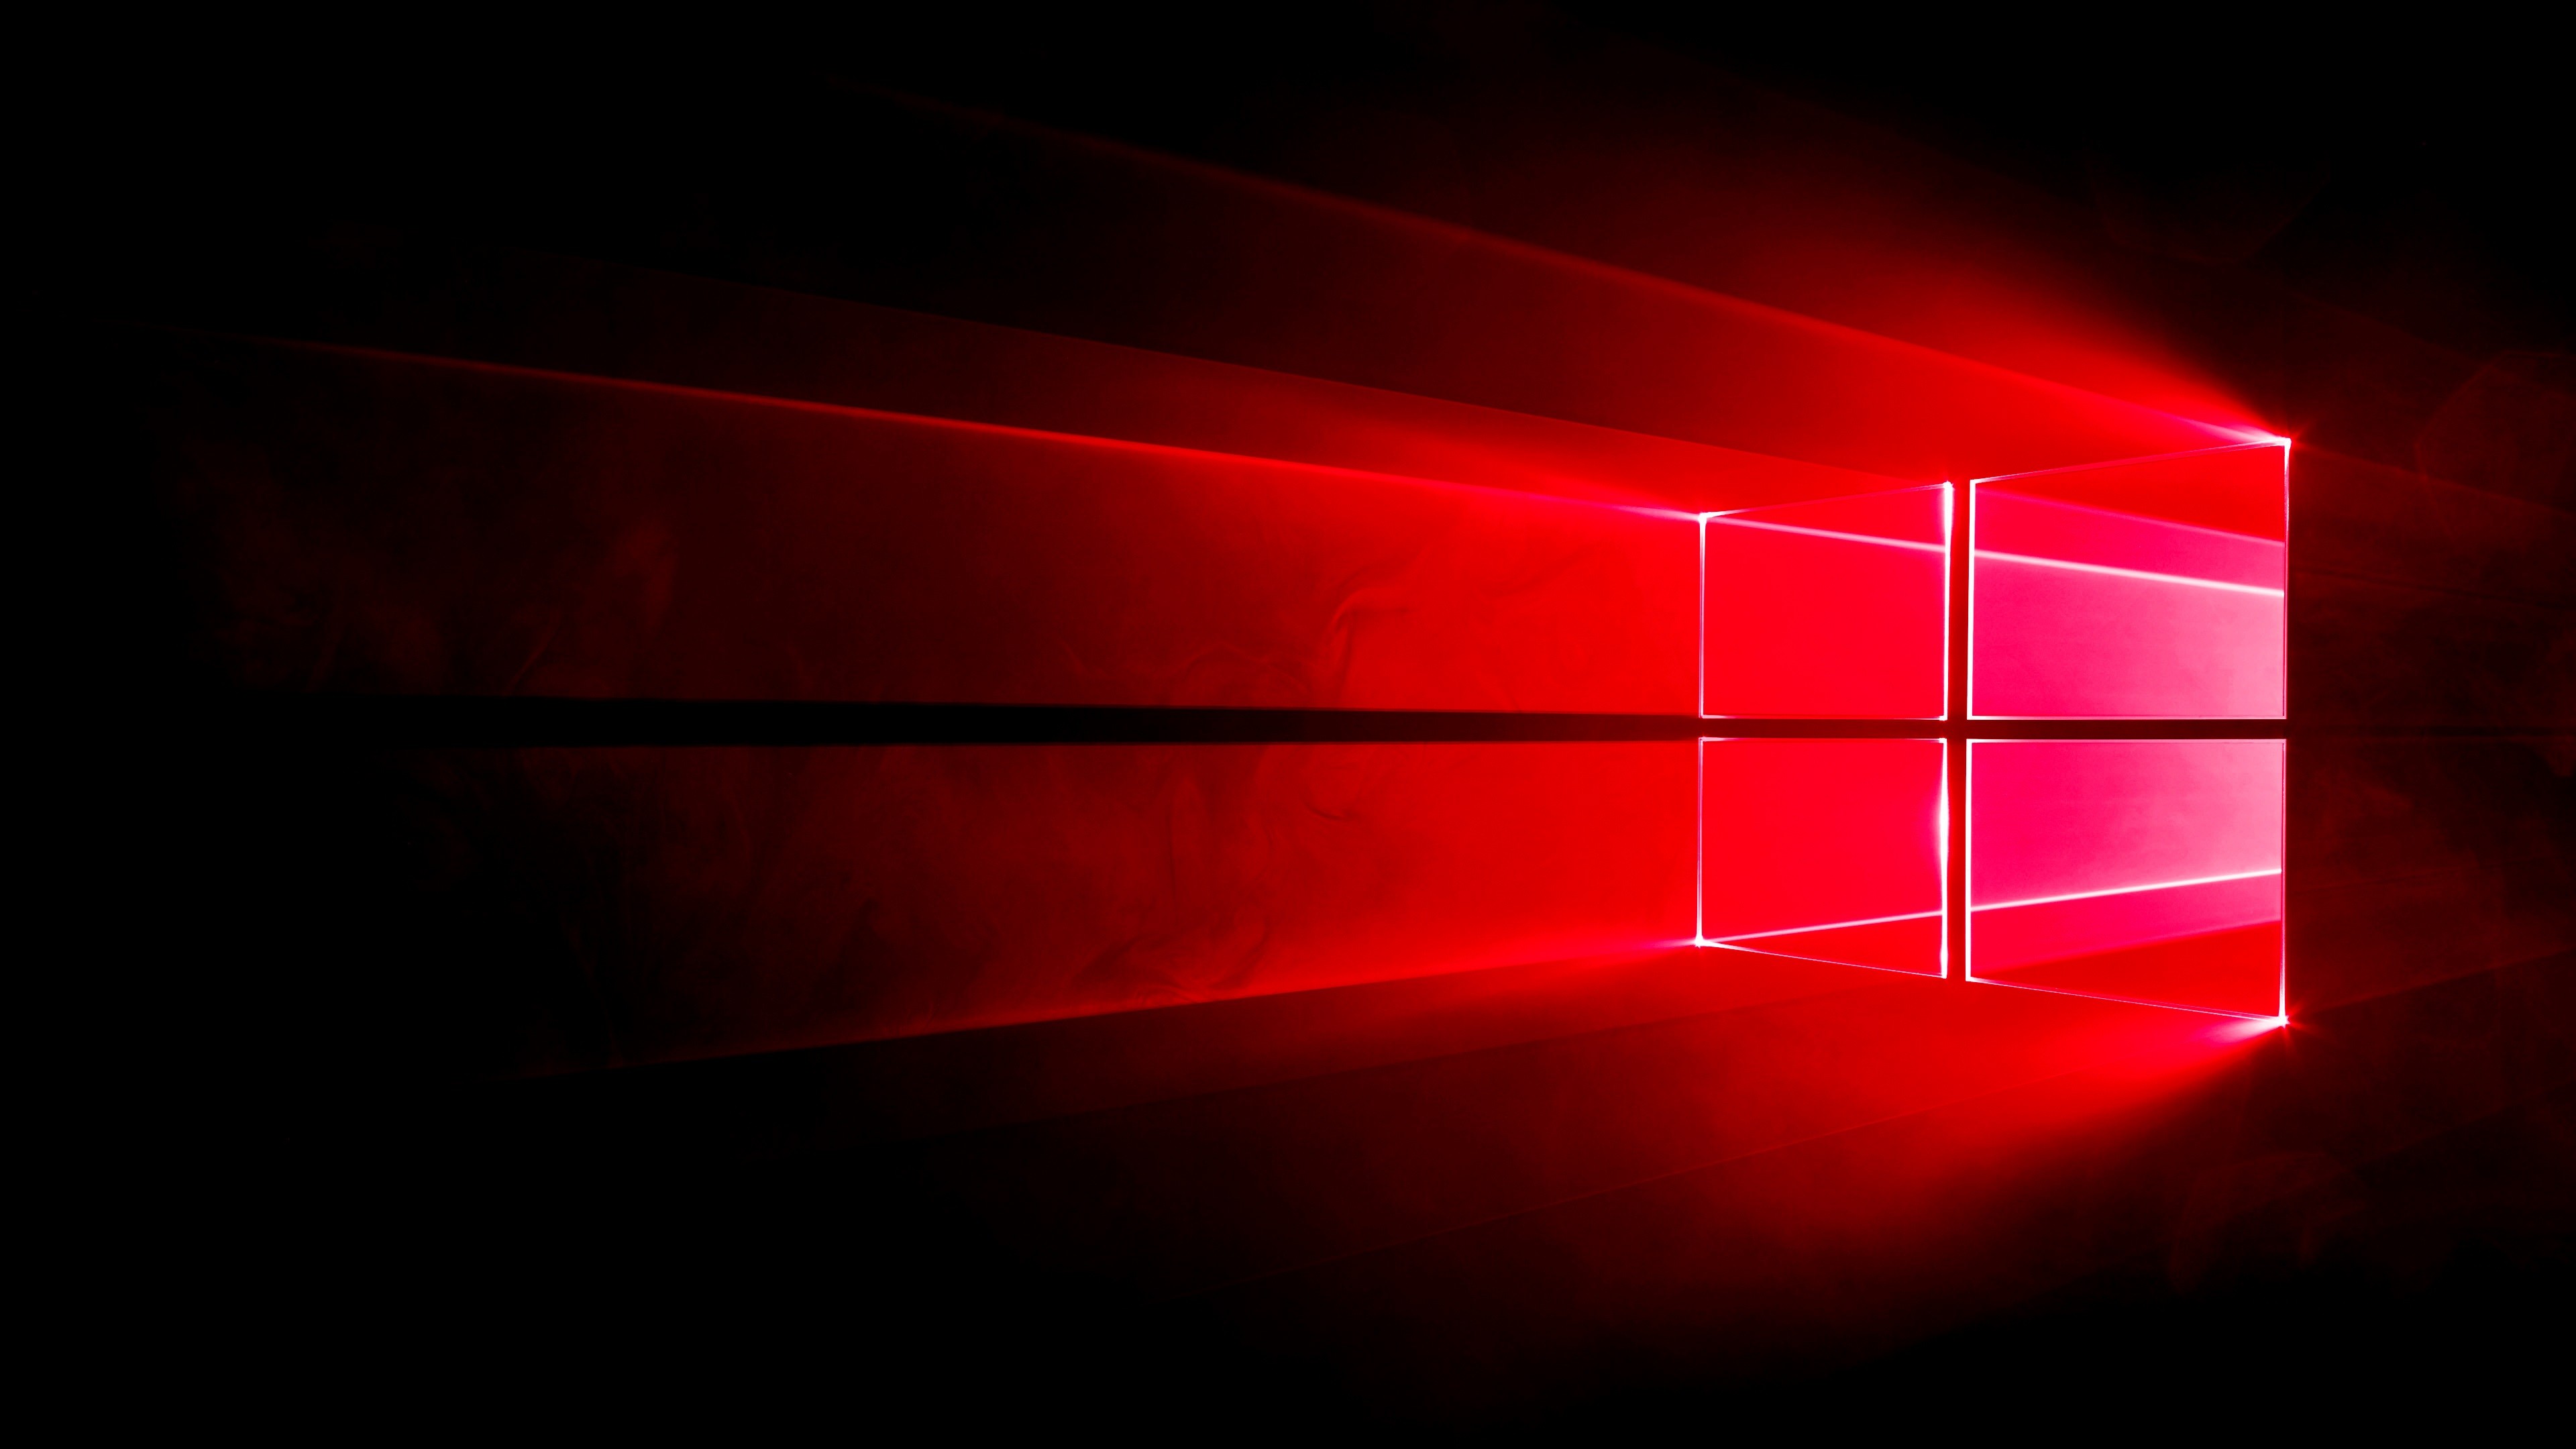 Windows 10 Redstone Build 11082 Now Available for Download